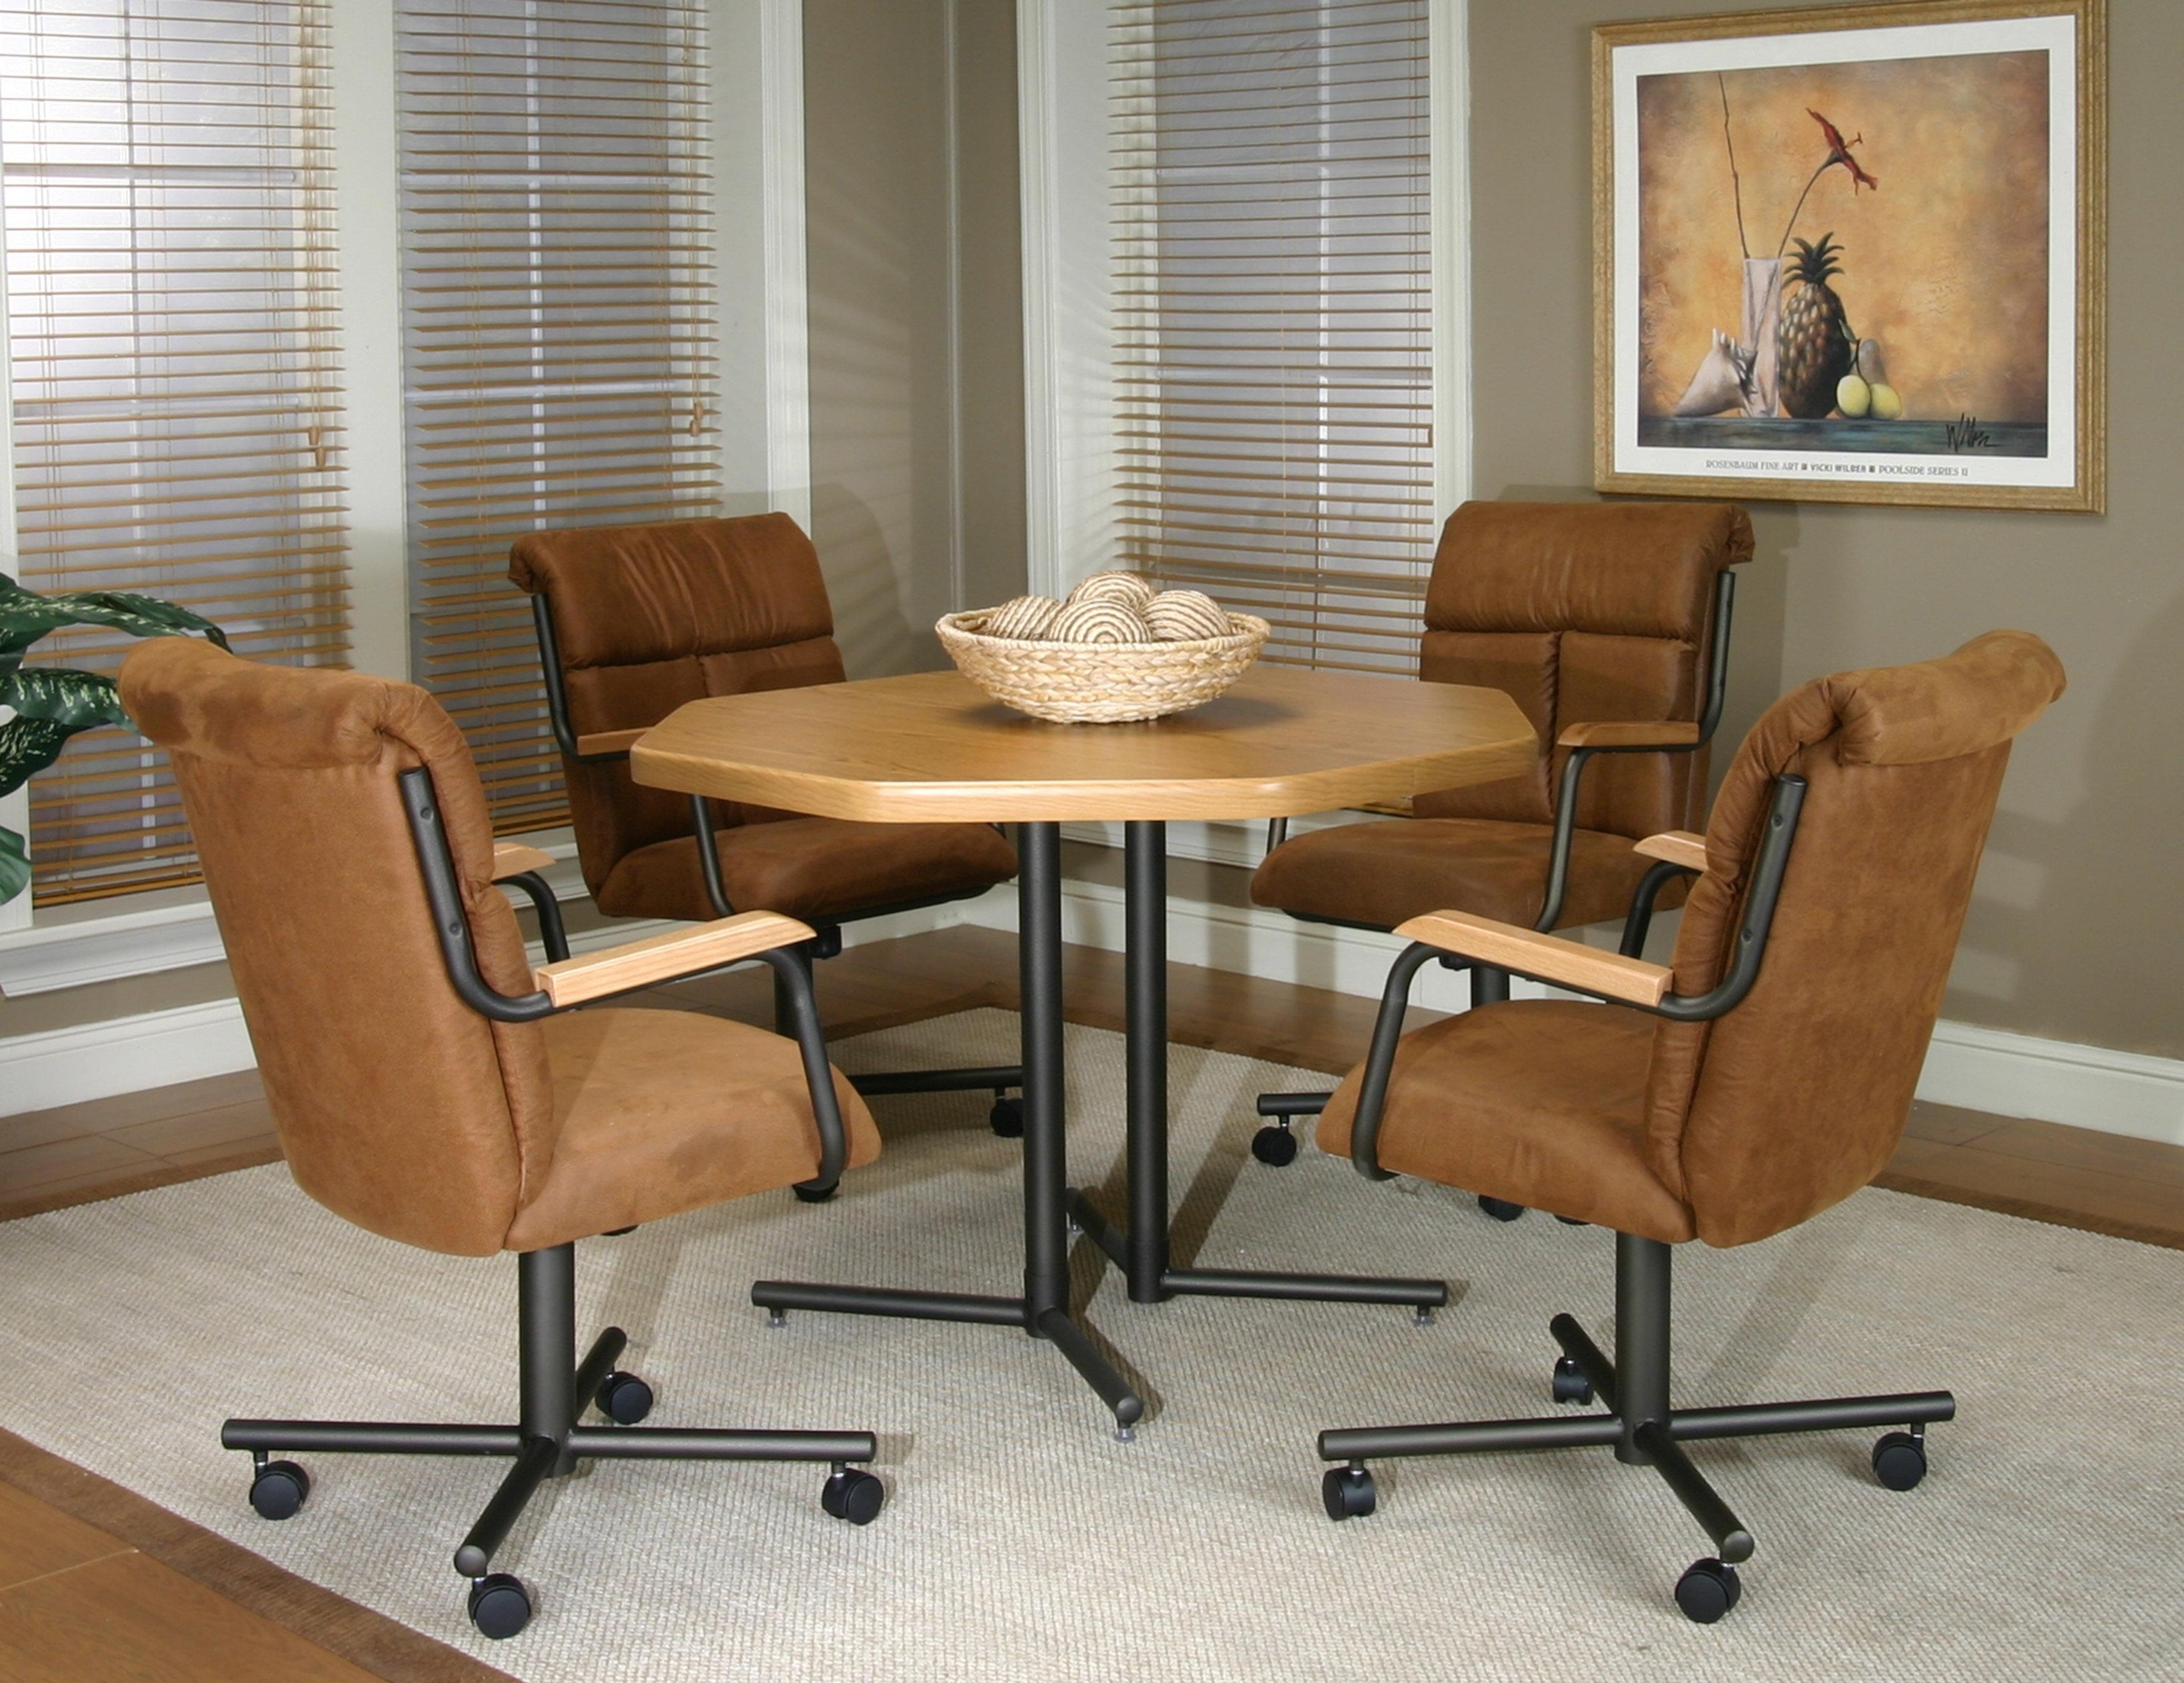 Dining Chairs With Casters Visualhunt, Modern Dining Chairs On Casters